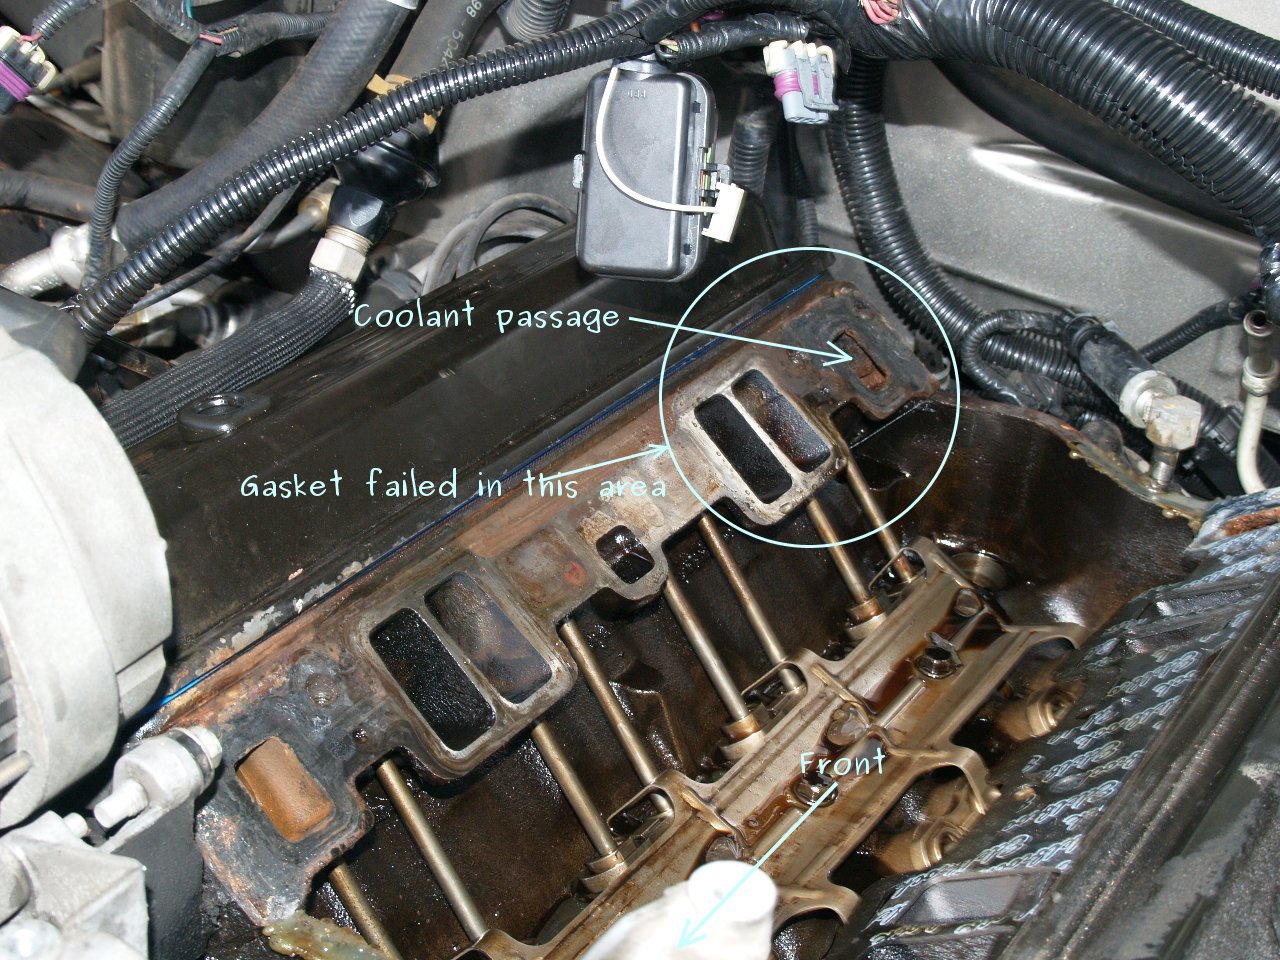 See P2104 in engine